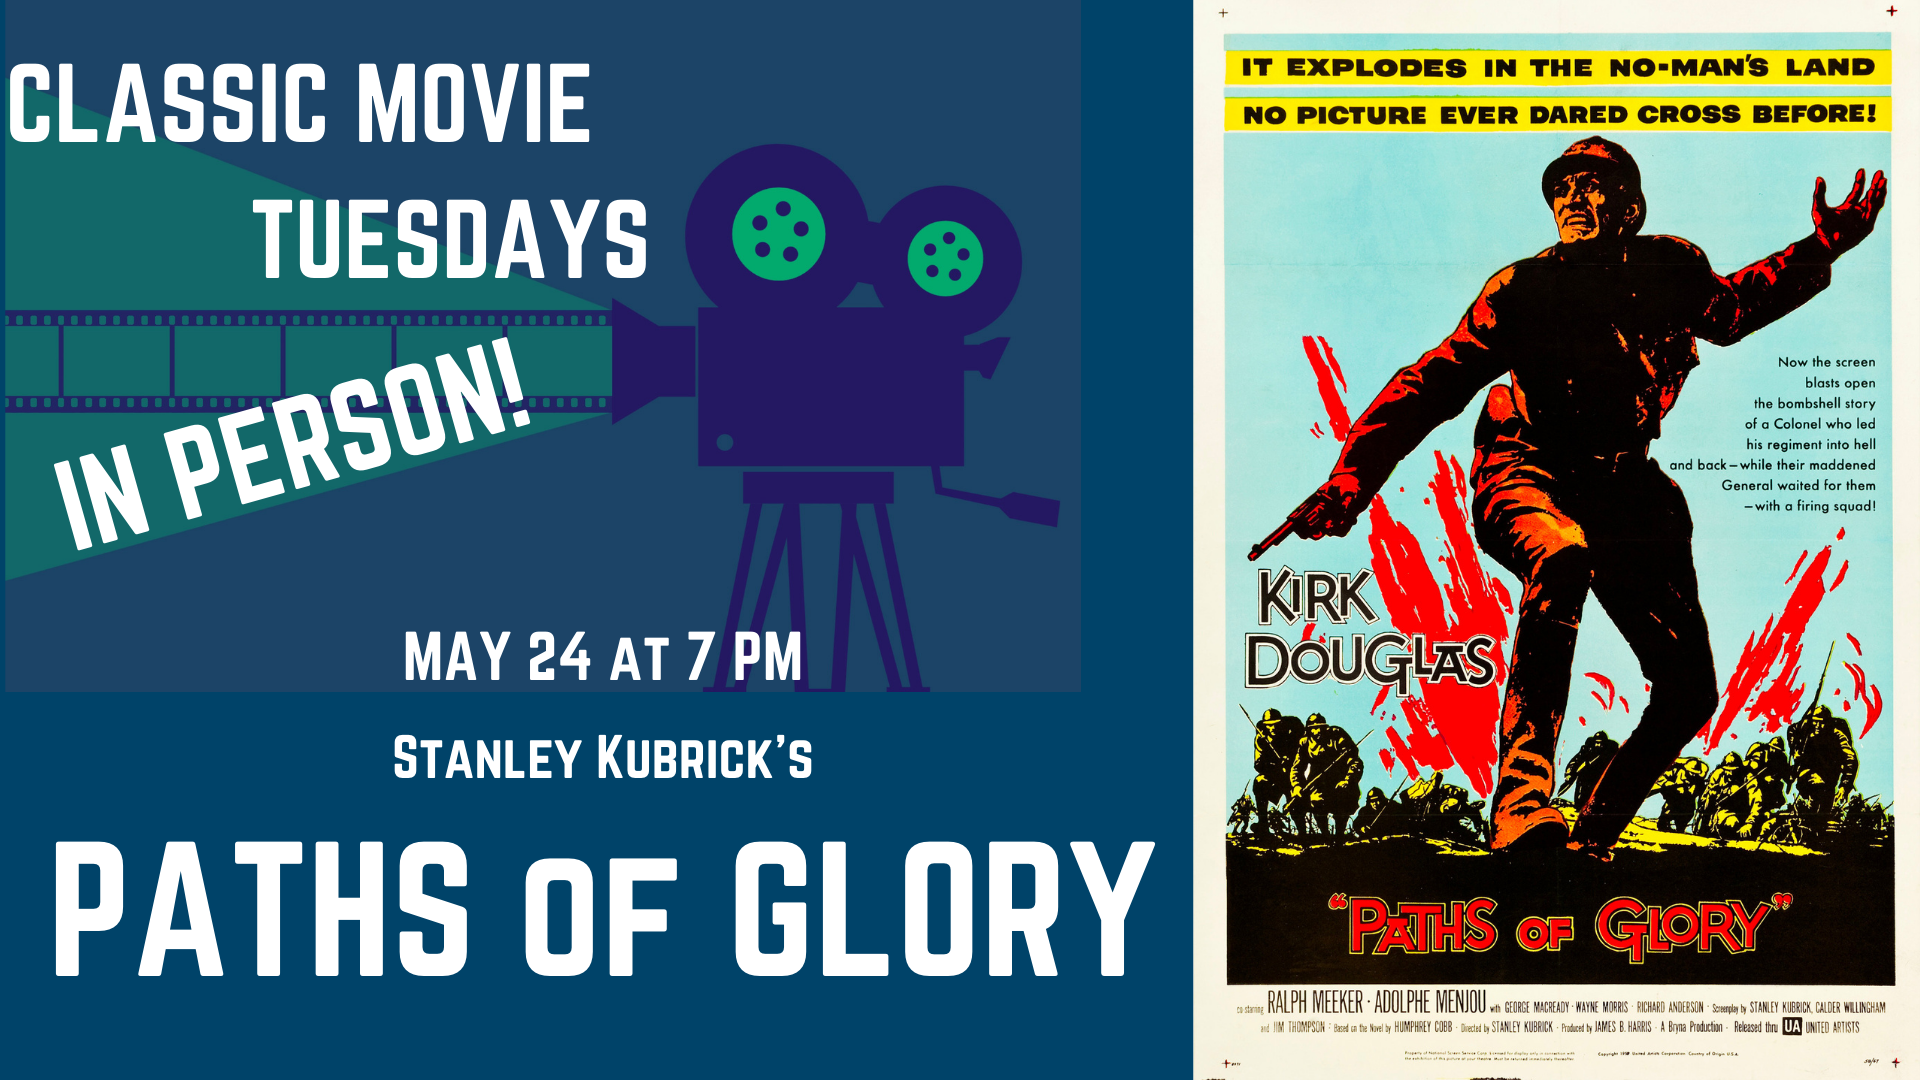 Banner advertising our screening of PATHS OF GLORY on May 24 at 7 PM, featuring the original 1957 movie poster.